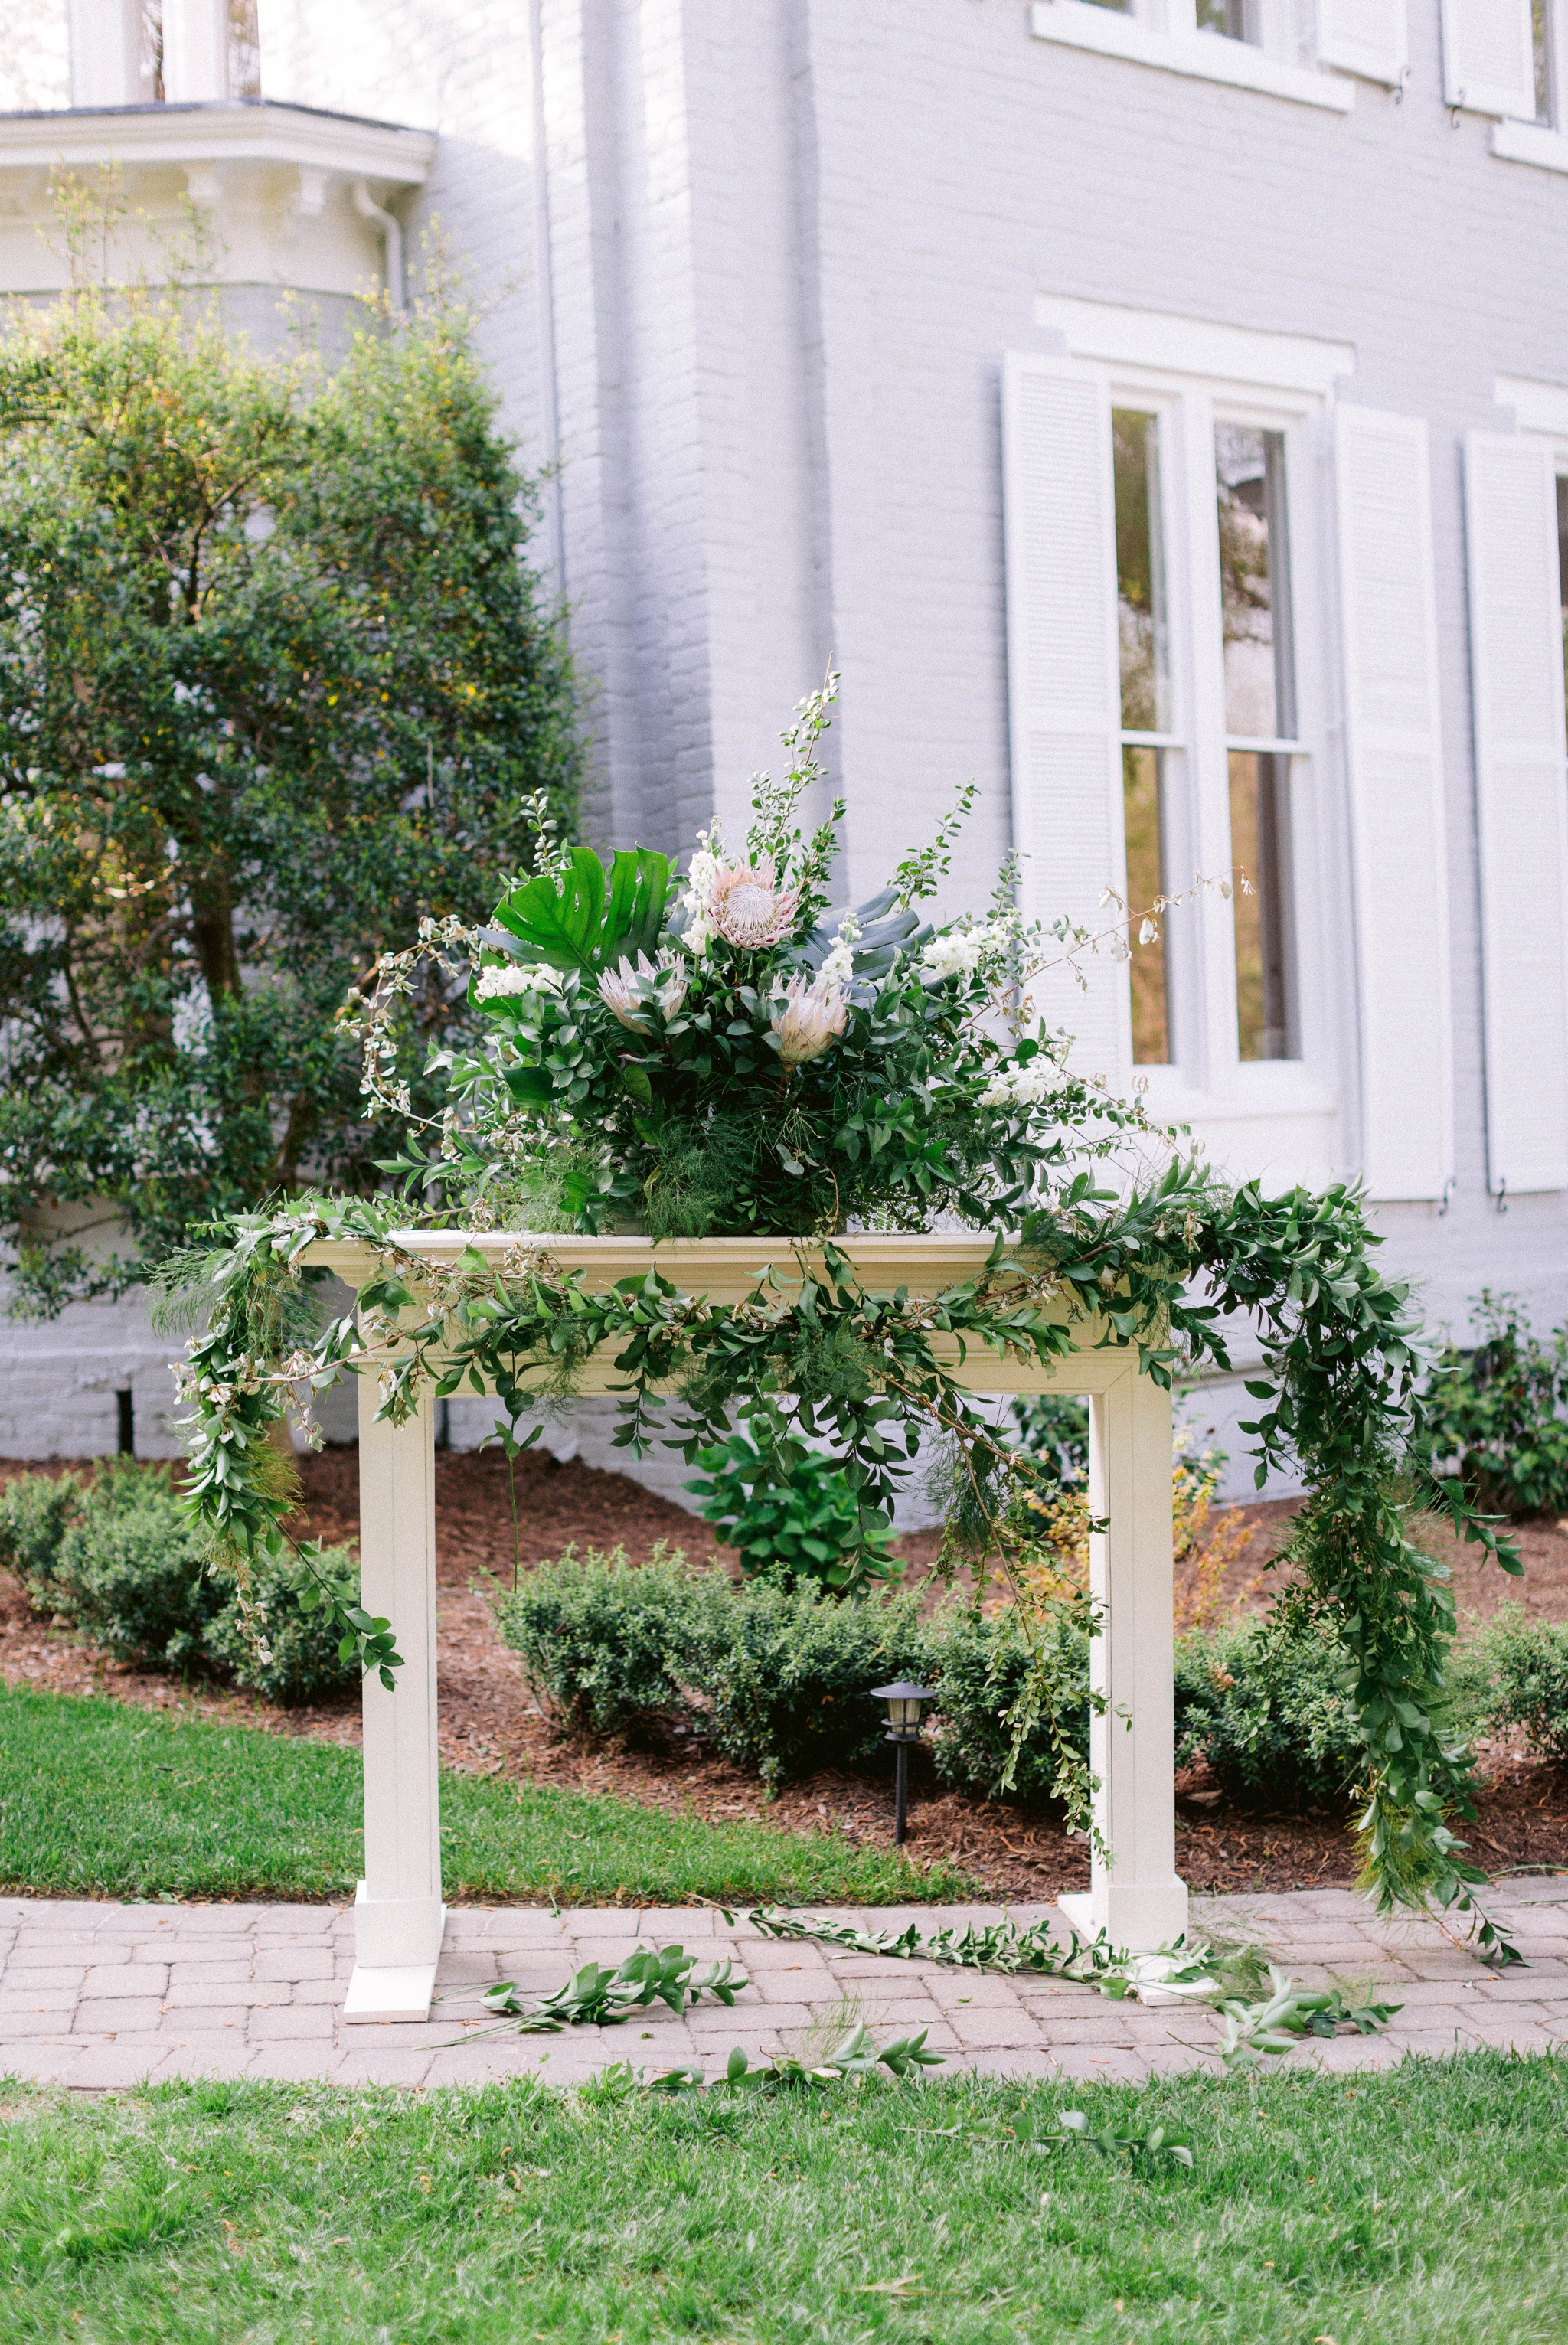  Garden Outdoor Ceremony with brown wooden chairs in front of an all white mansion - Wedding Fireplace mantel with lush green decorations - Honolulu, Oahu, Hawaii Wedding Photographer - Johanna Dye Photography 